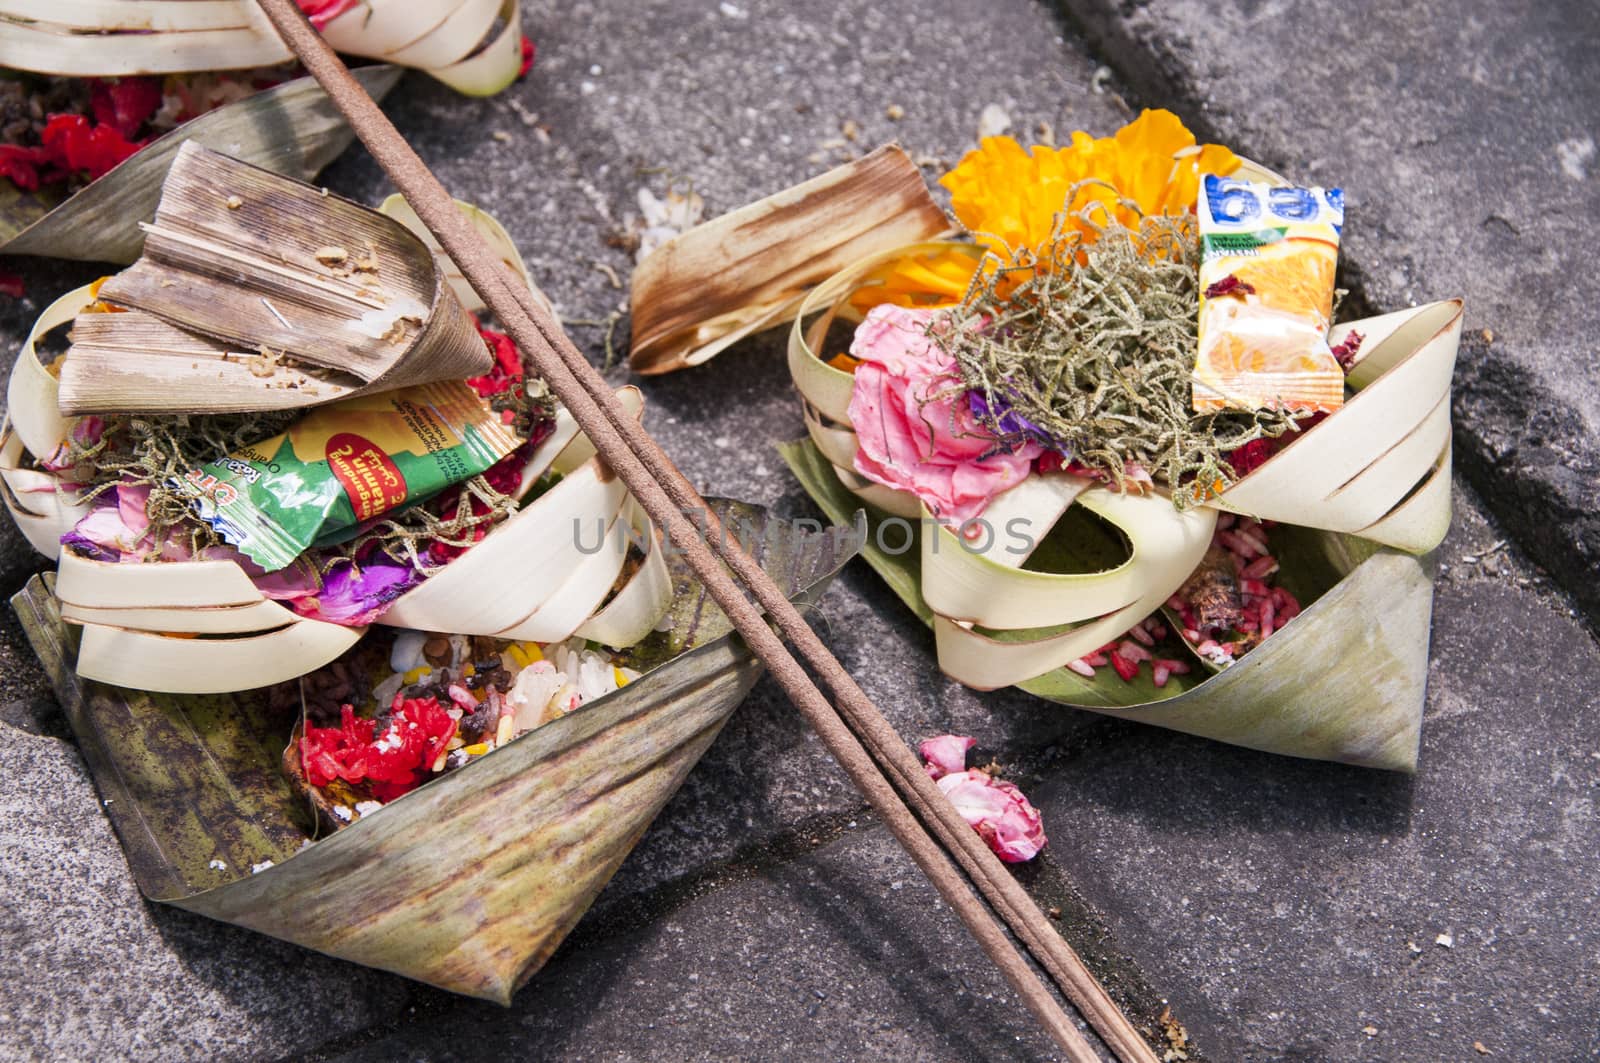 Hindu offerings and gifts to god in the temple in Bali Indonesia